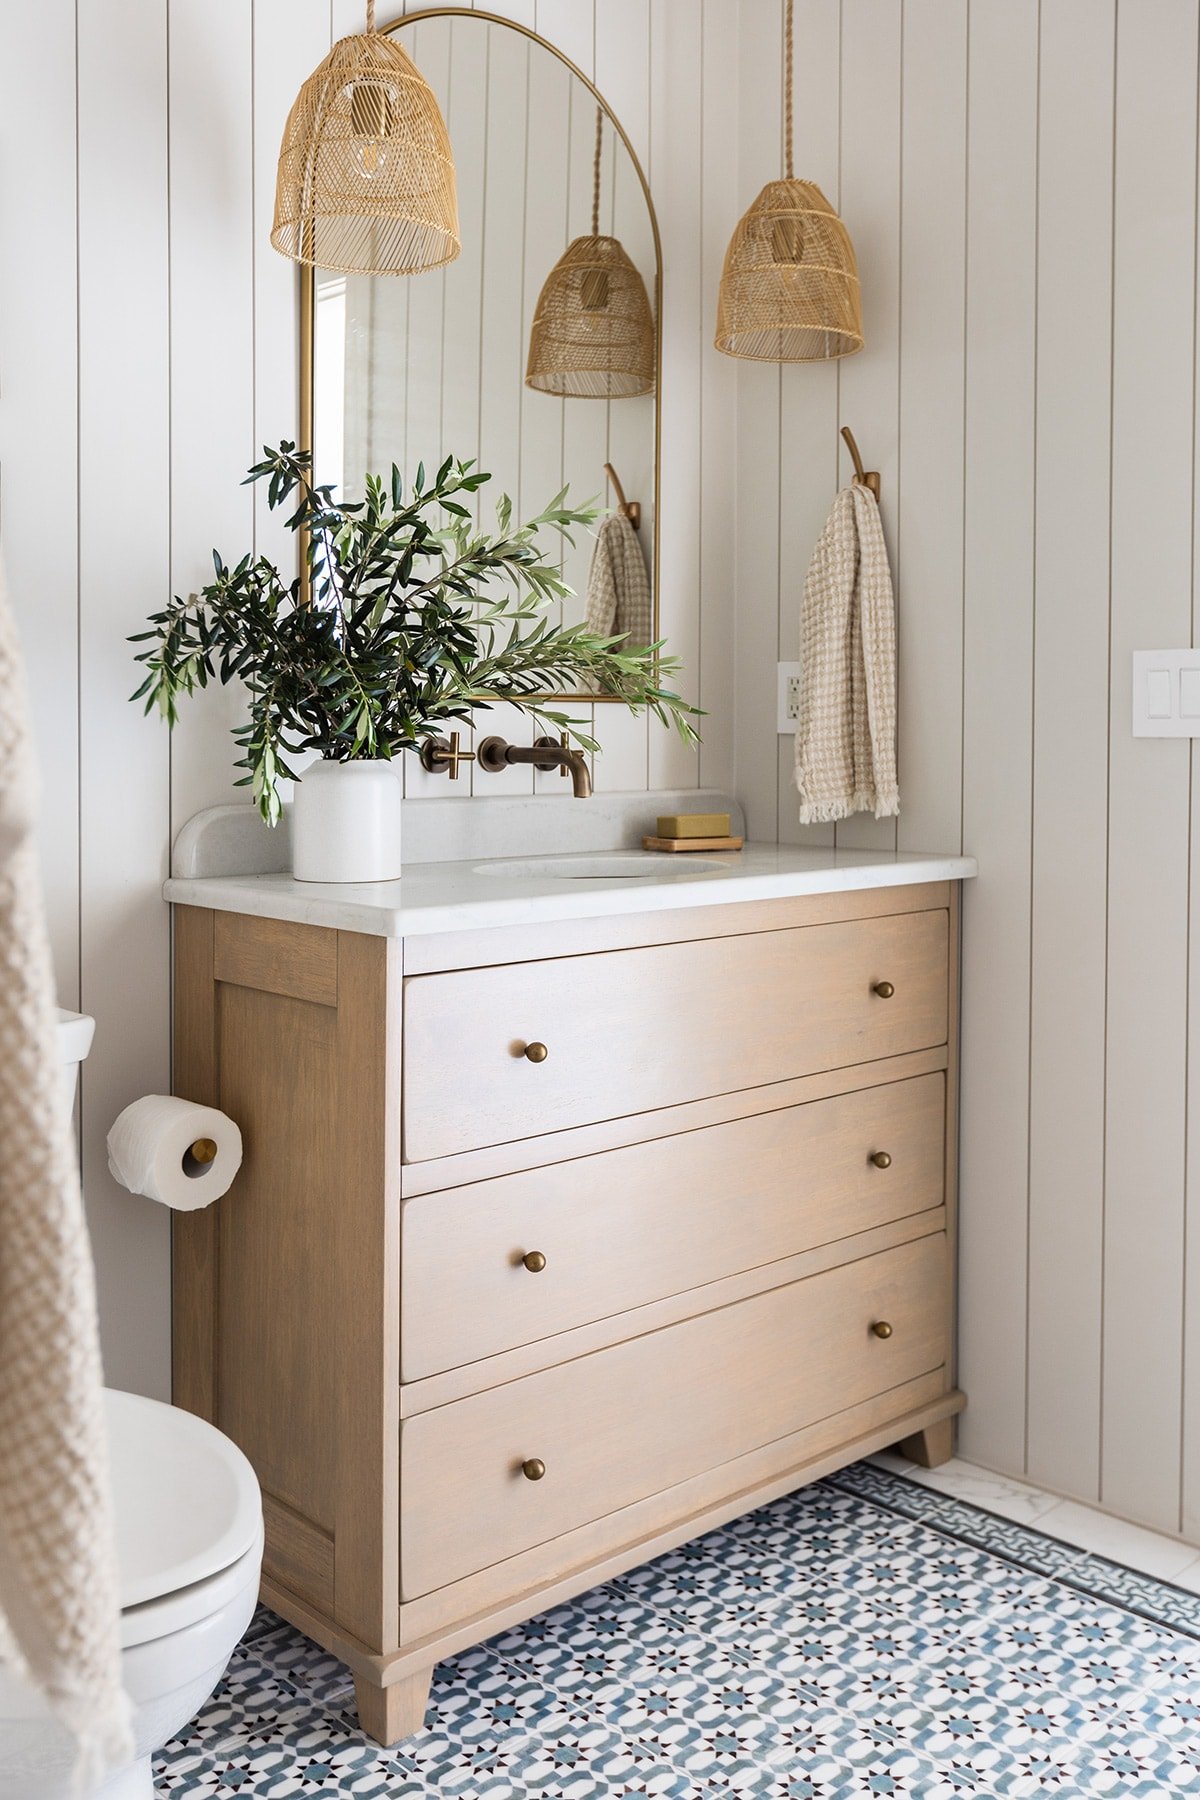 bathroom with sherwin williams egret white shiplap walls and wood dresser vanity